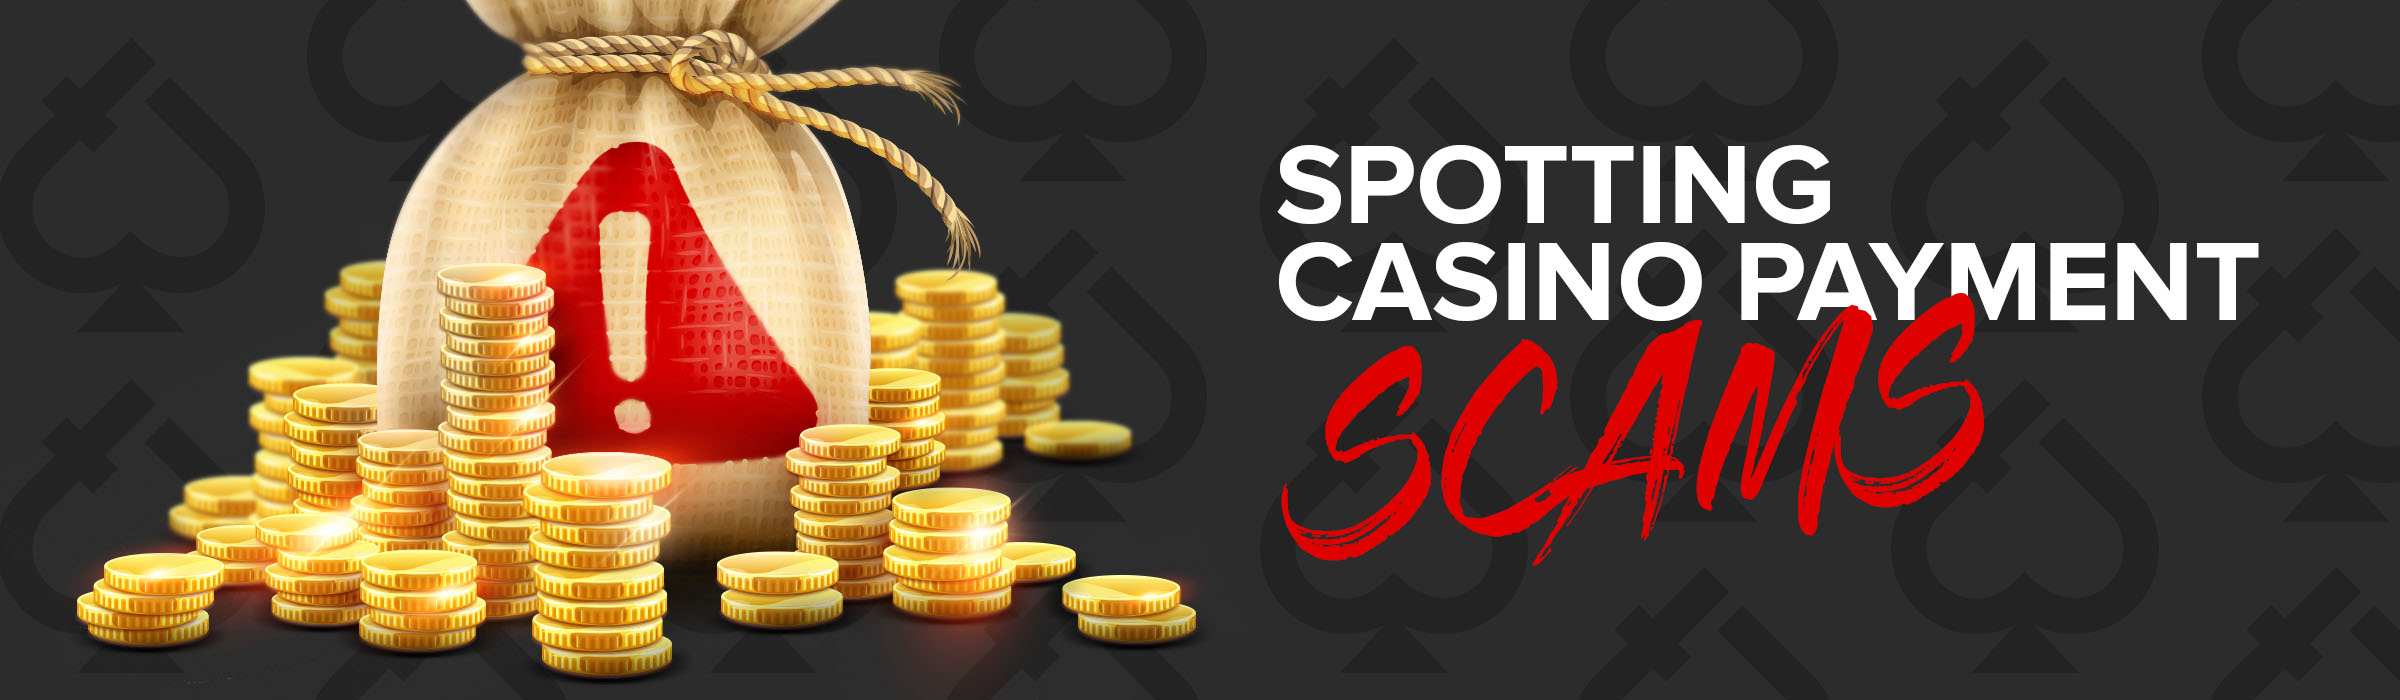 Spotting Casino Payment Scams